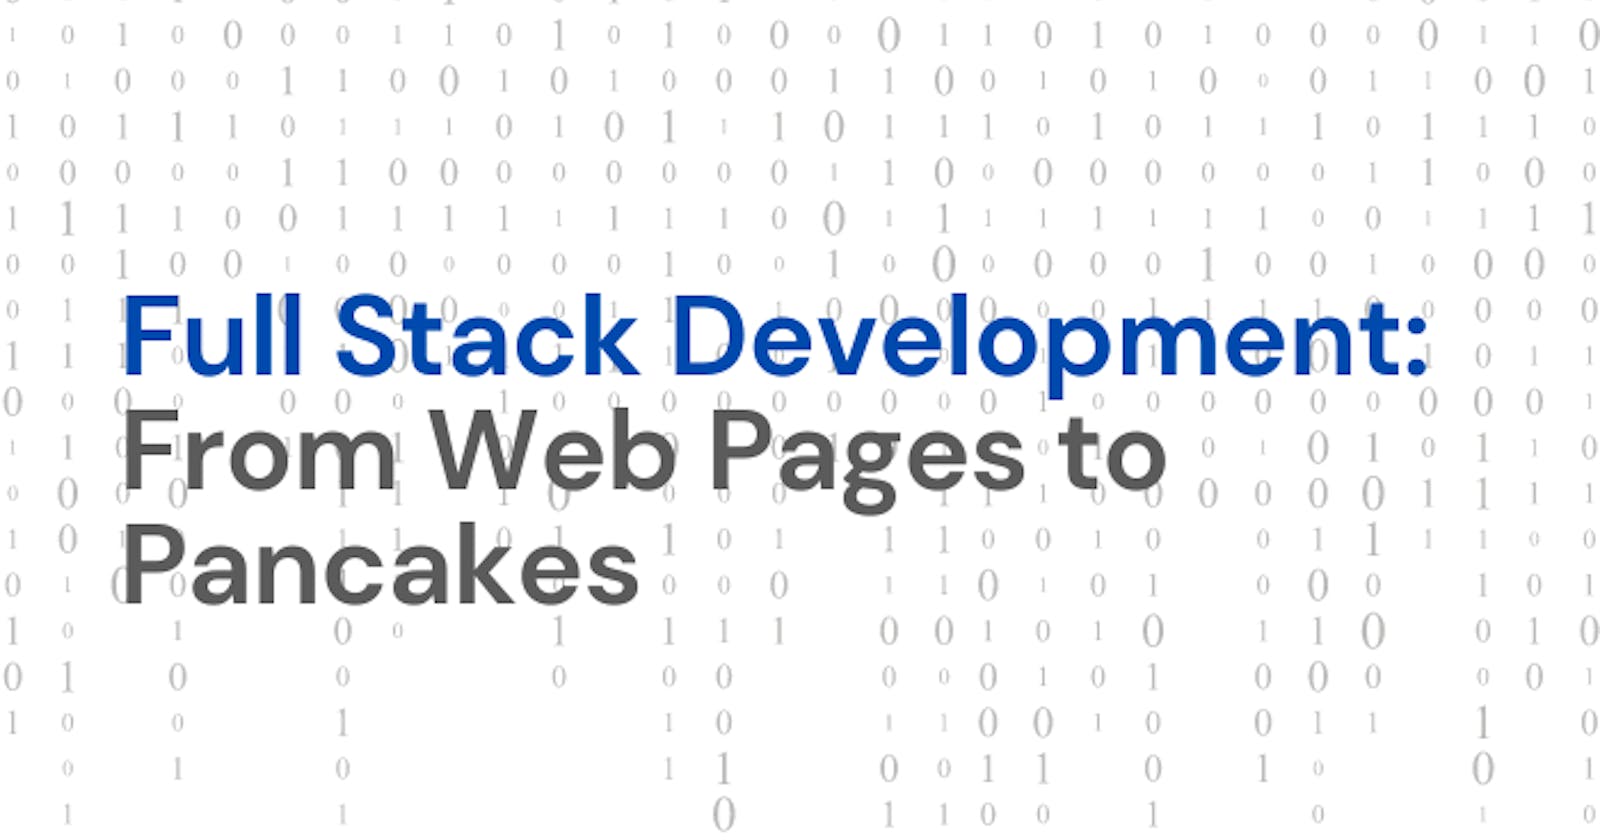 Full Stack Development: From Web Pages to Pancakes